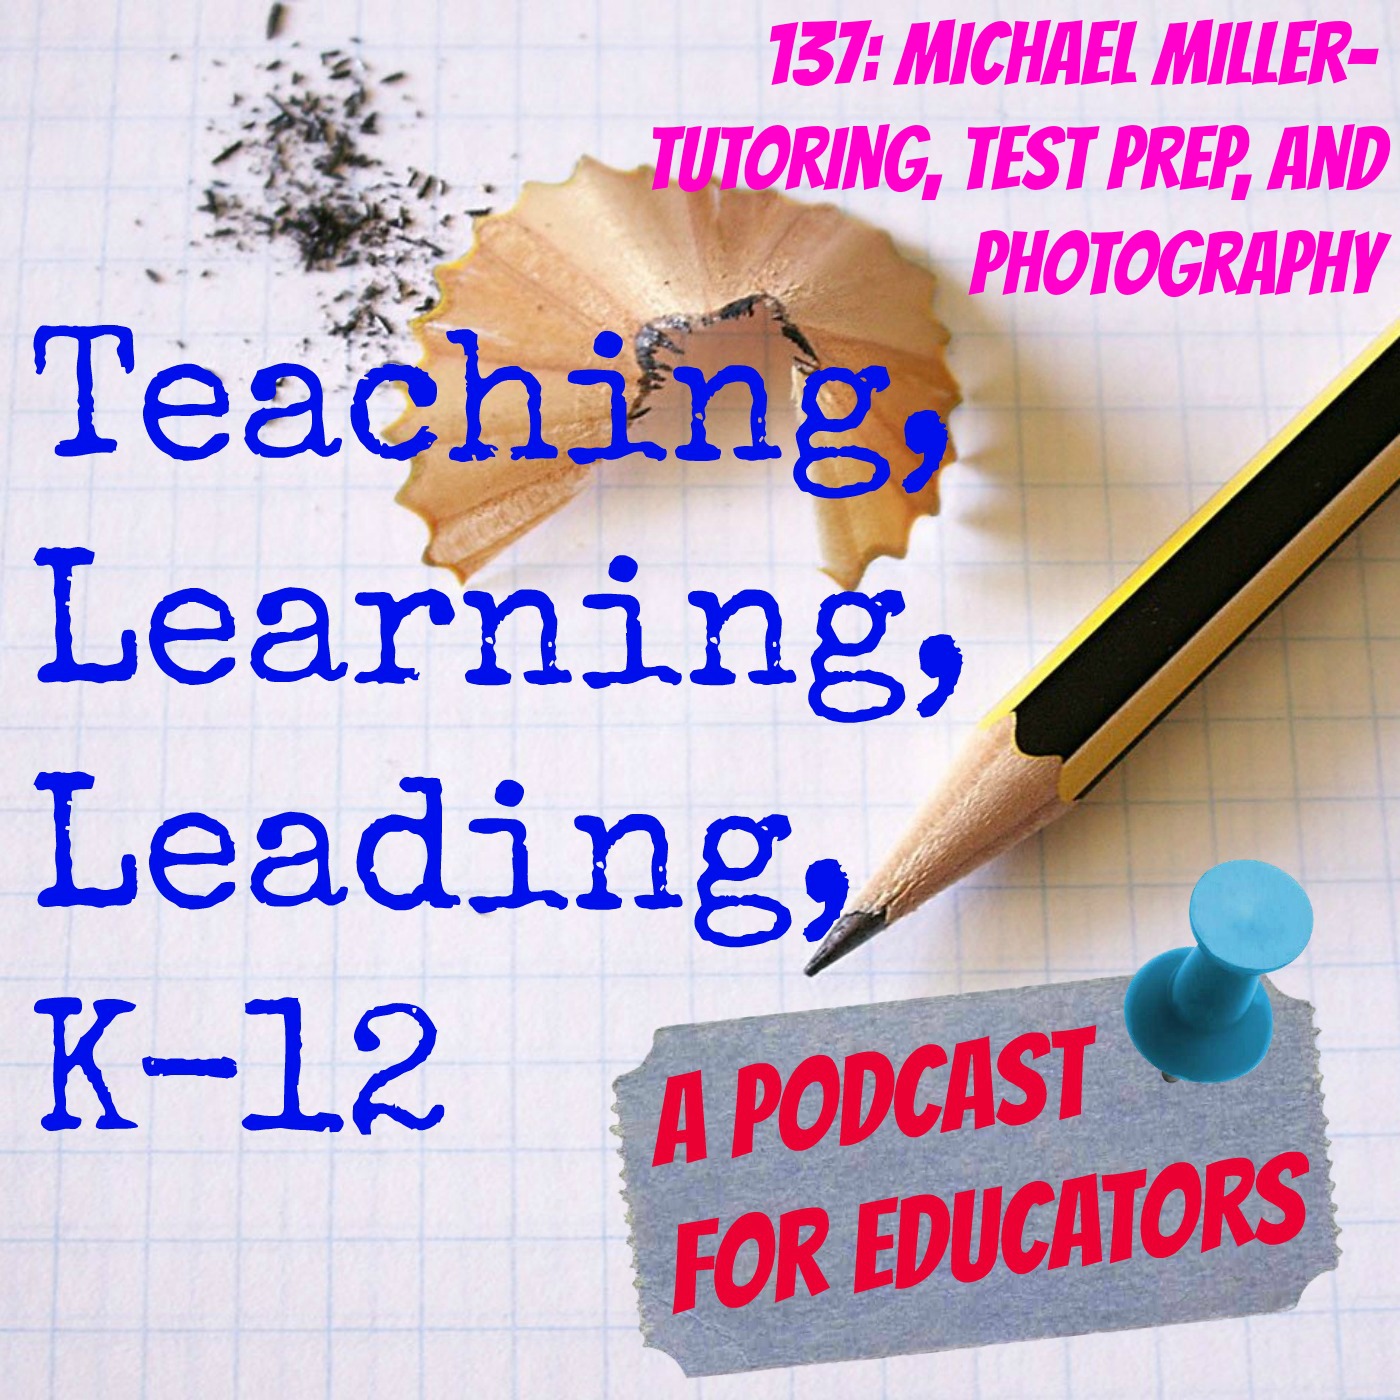 137: Michael Miller-Tutoring, Test Prep, and Photography